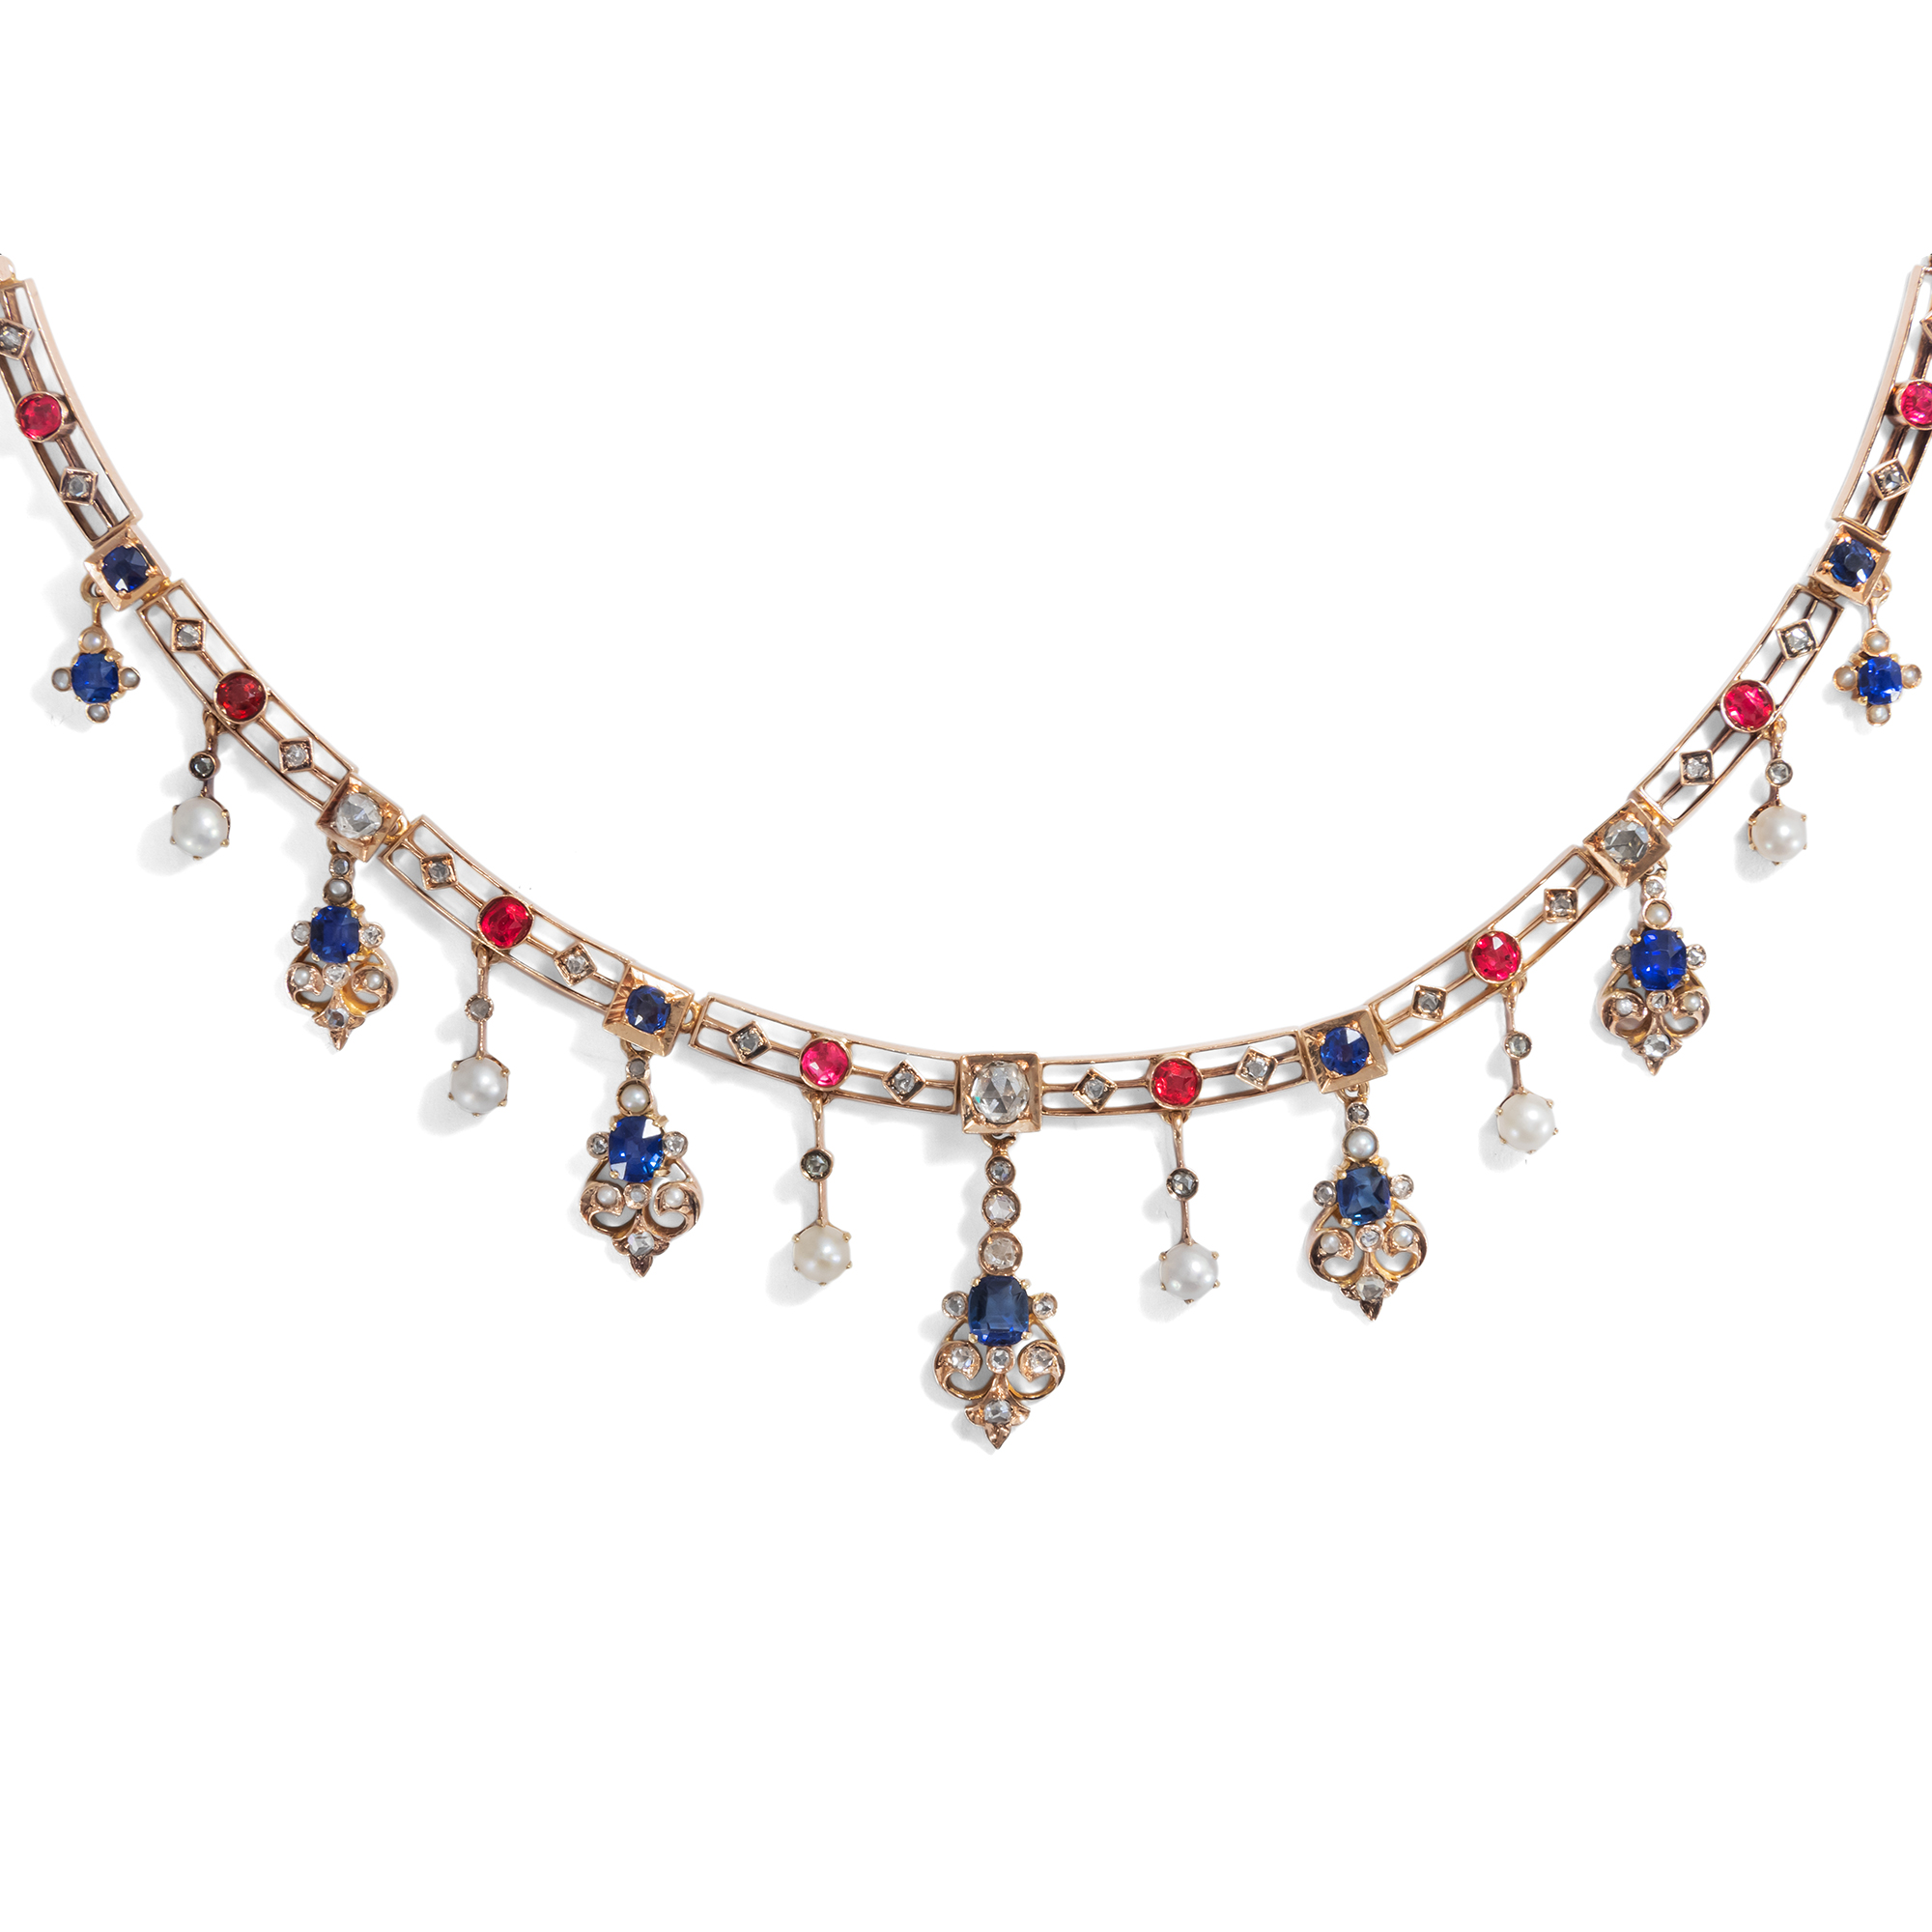 Antique Necklace with Sapphires, Spinels, Diamonds & Natural Pearls, 1880s